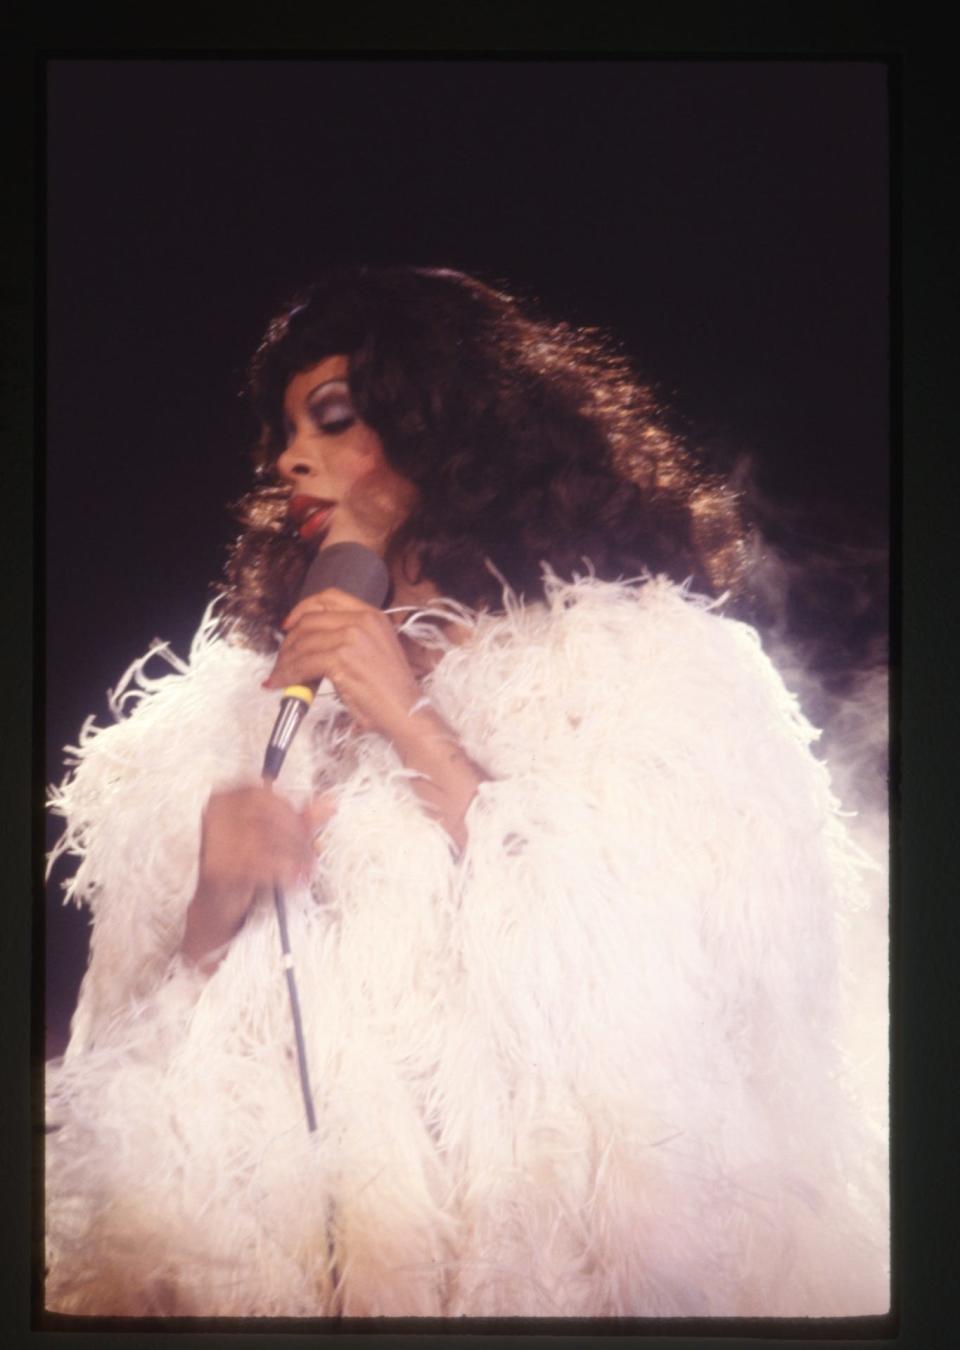 Donna Summer's ascension from club music star in Germany to mainstream breakout in America is explored in her HBO documentary.